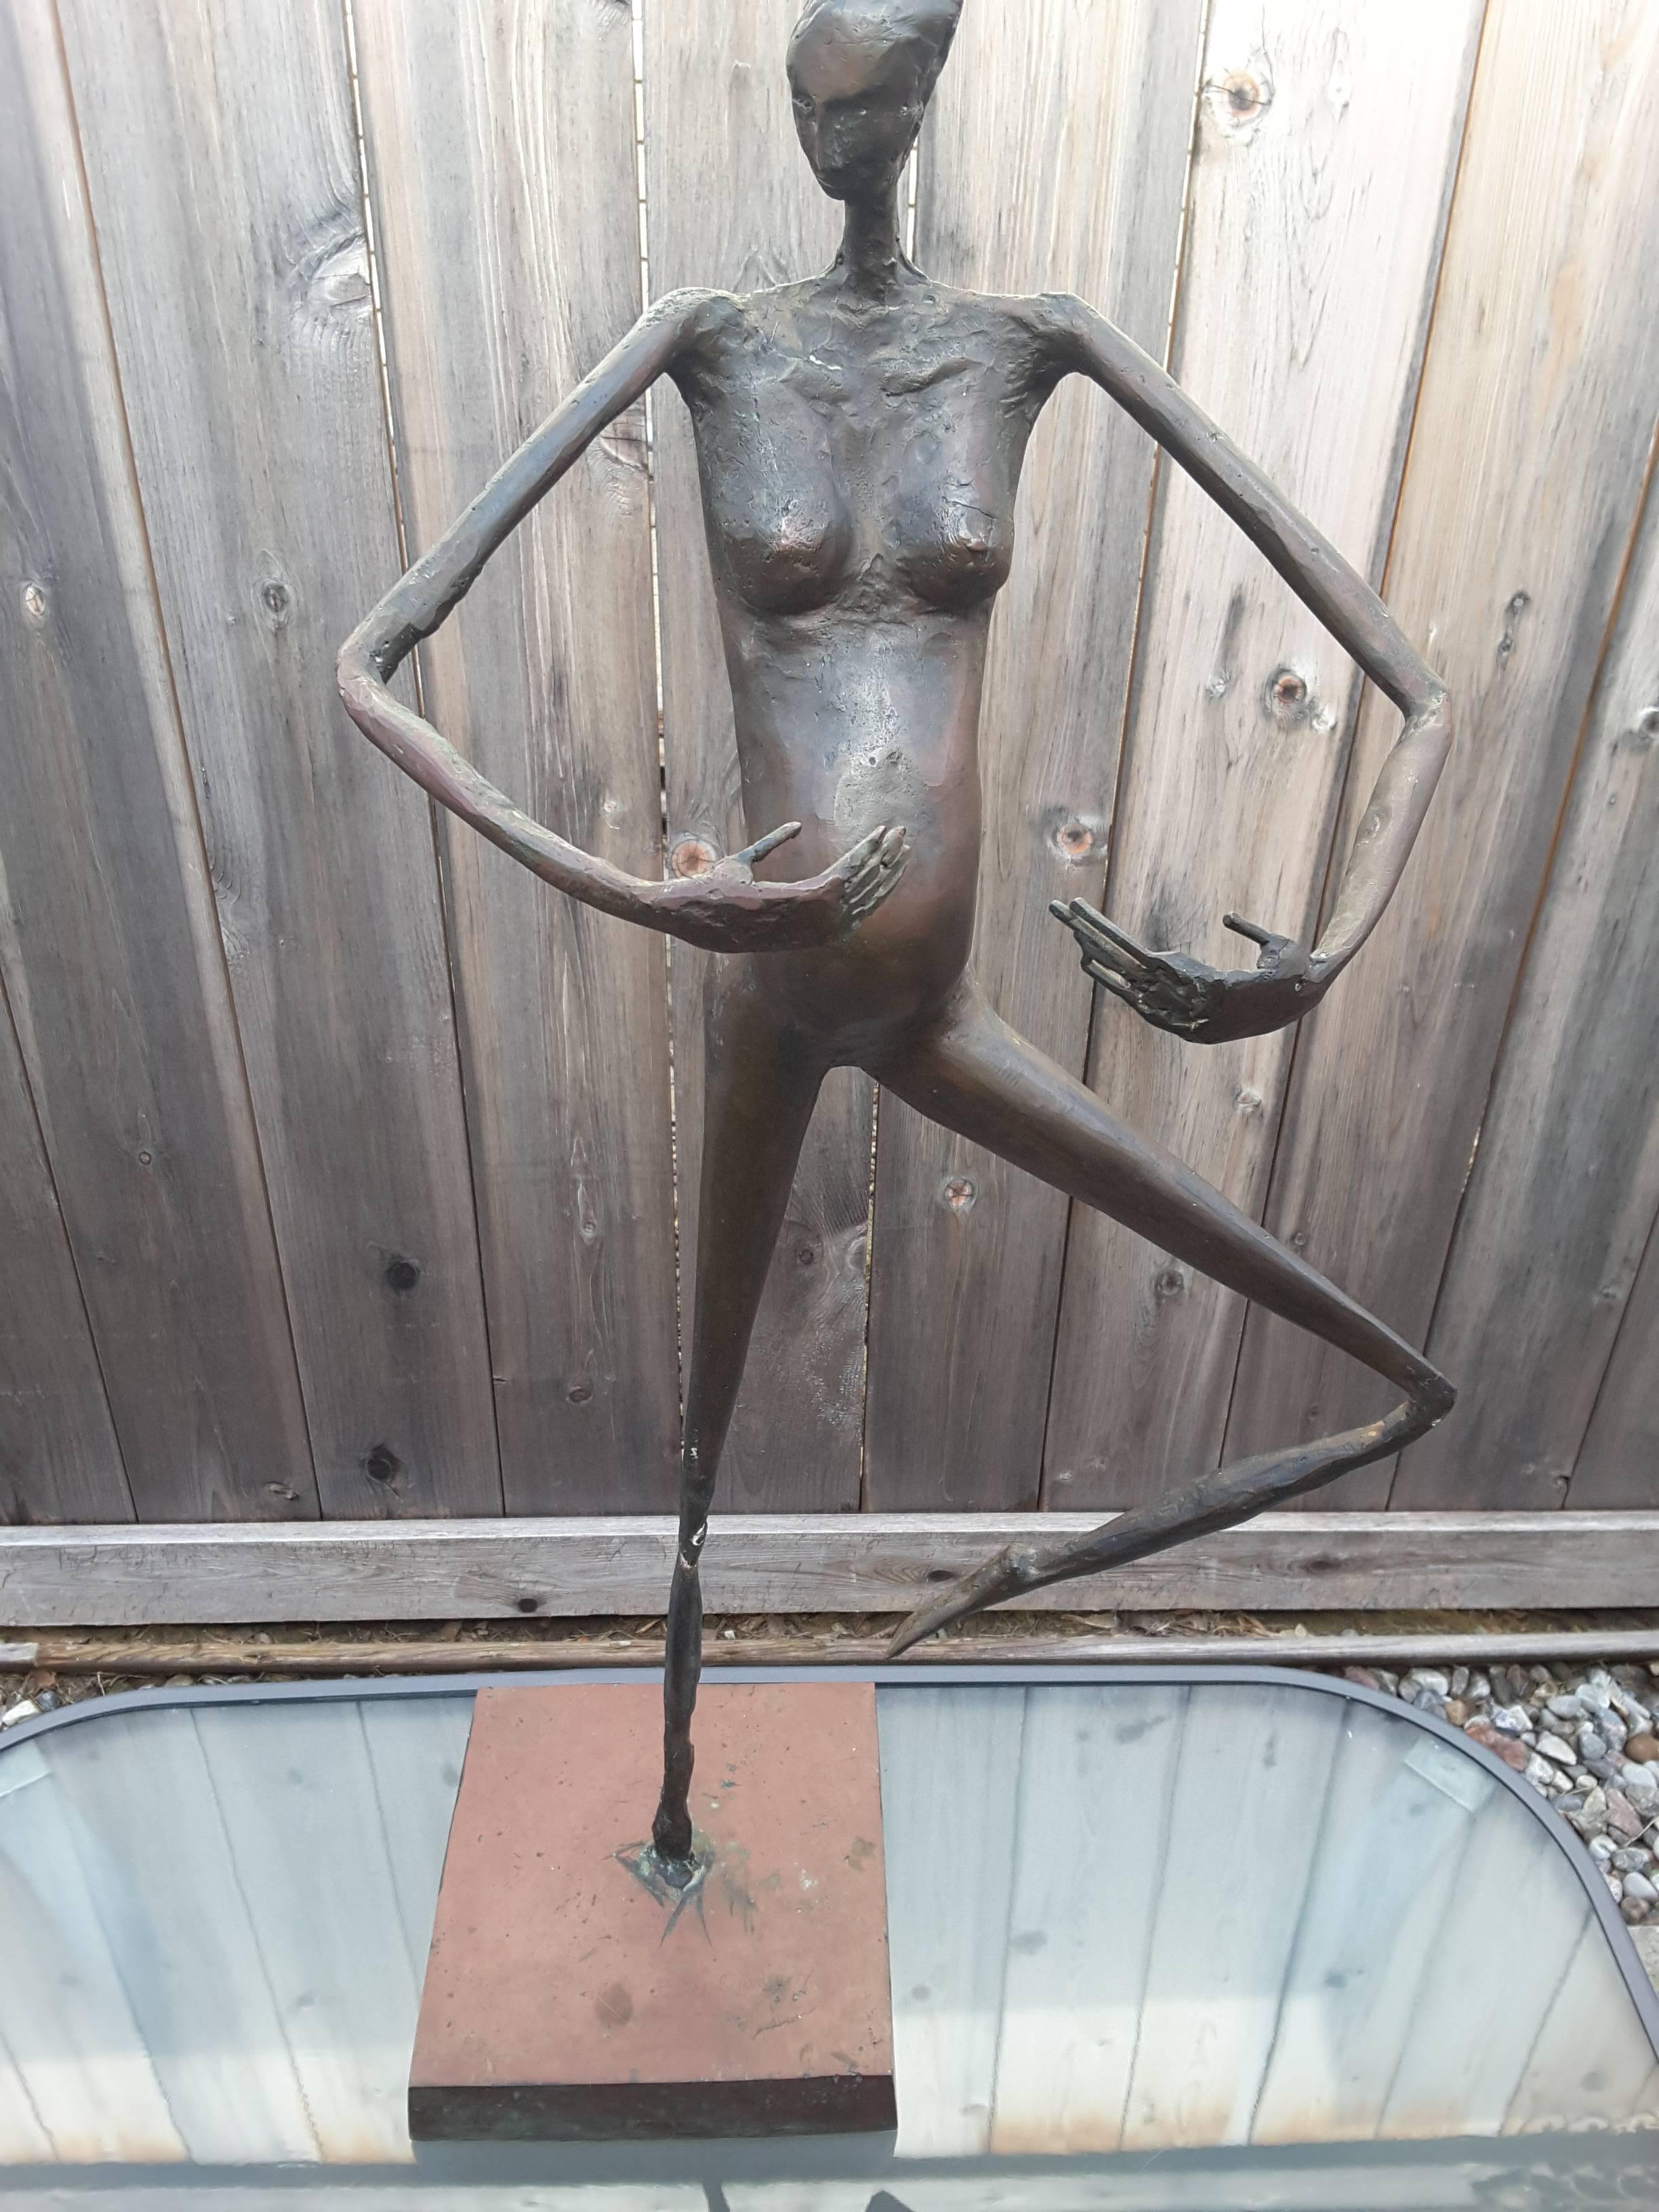 Limited Edition #4 of 8, modern sculpture by Bruce Garner, signed and dated, 75 for 1975. The sculpture is of a large-scale 32 1/2" inches tall x 14" inches wide x 12" inches deep.
The solid bronze sculpture is of a woman in a an